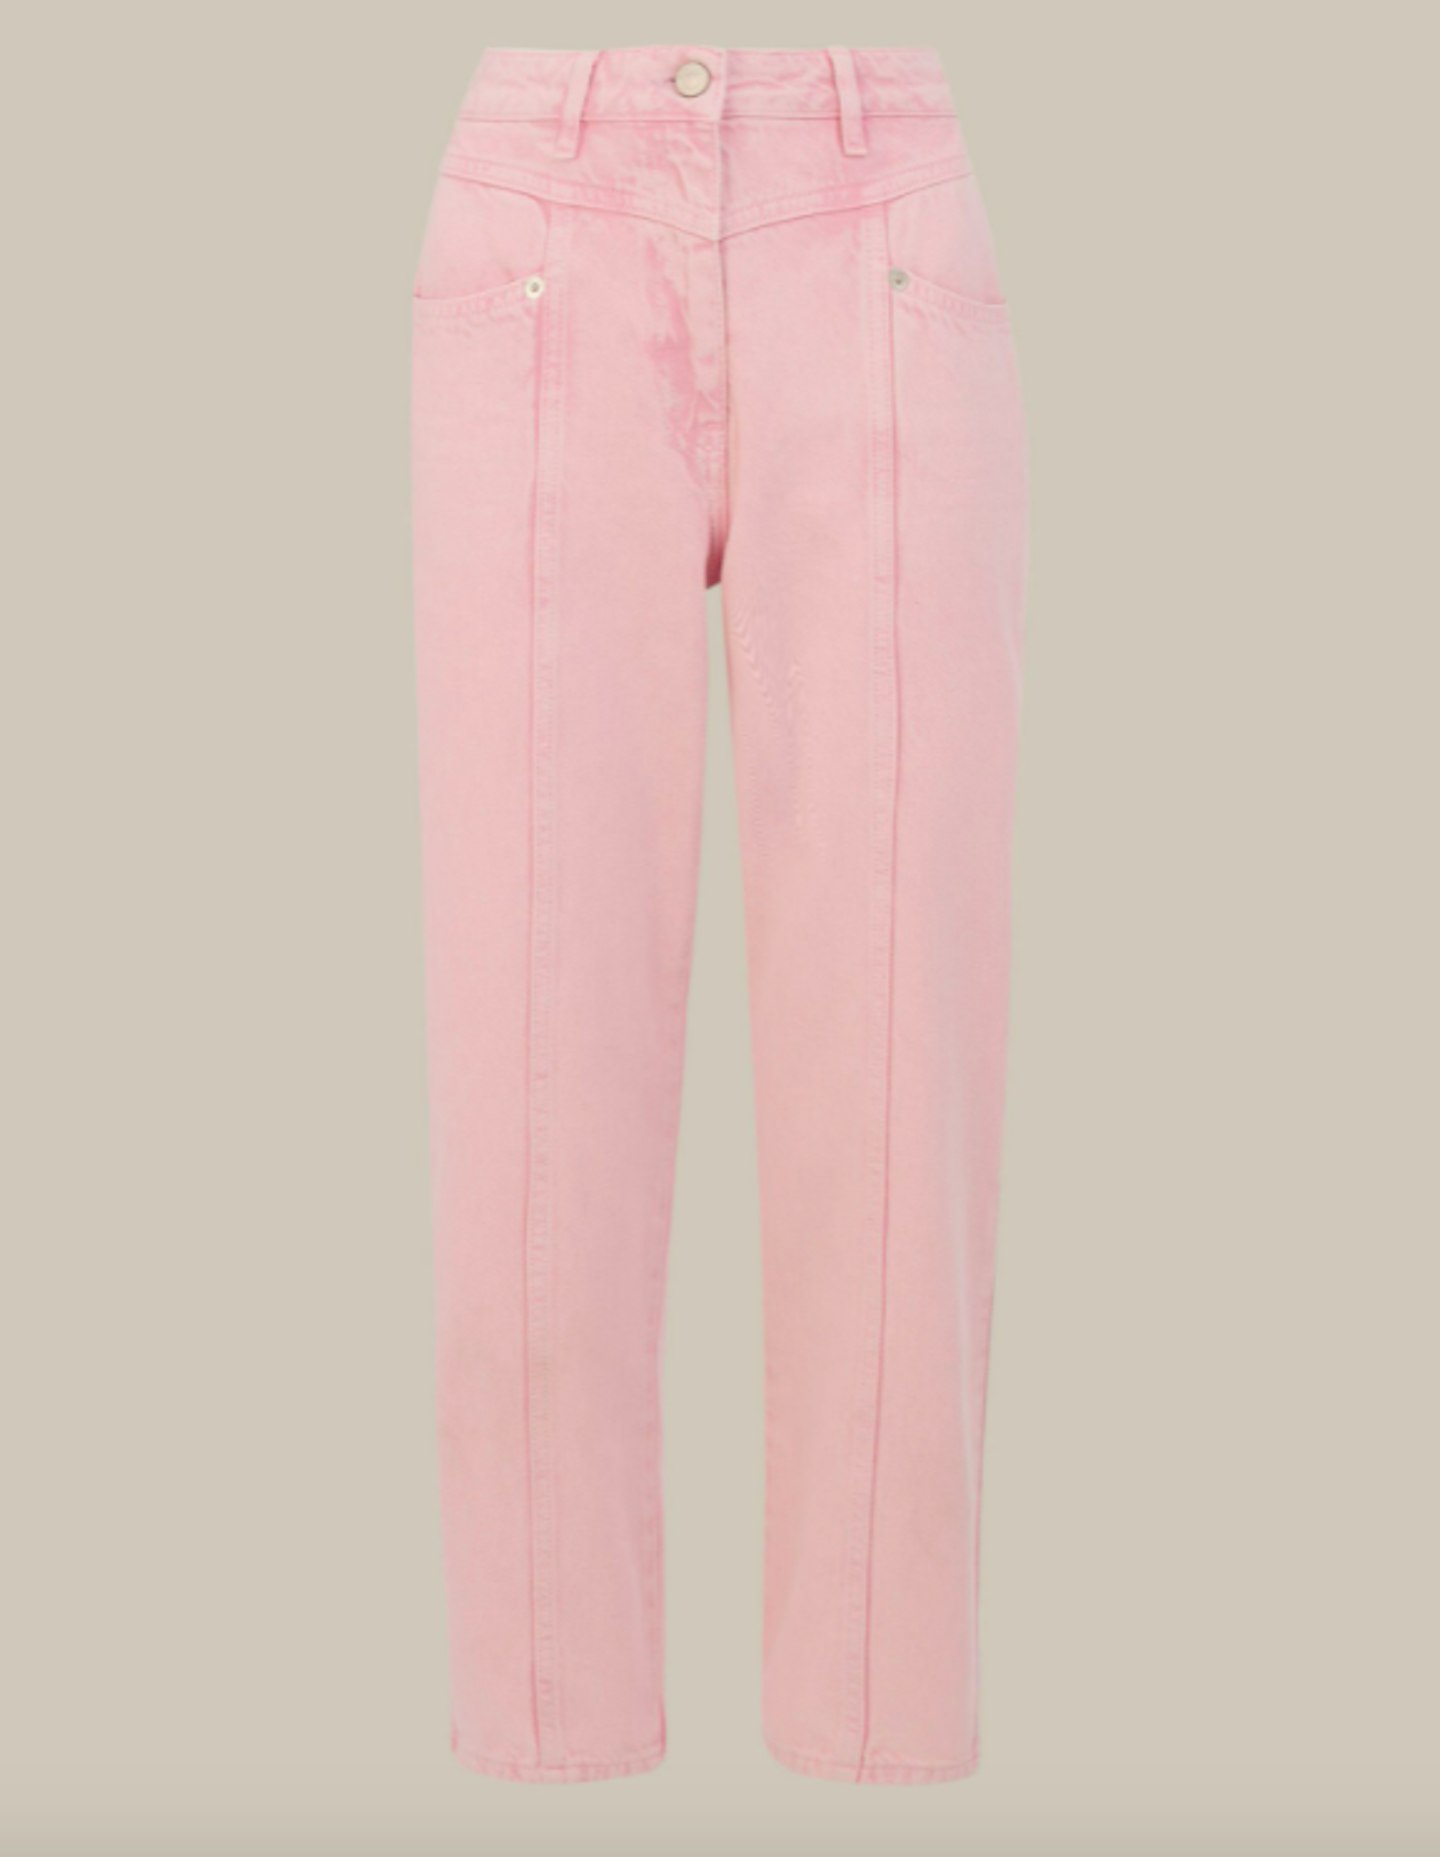 Whistles, Emma Panelled Jeans, WAS £99 NOW £45